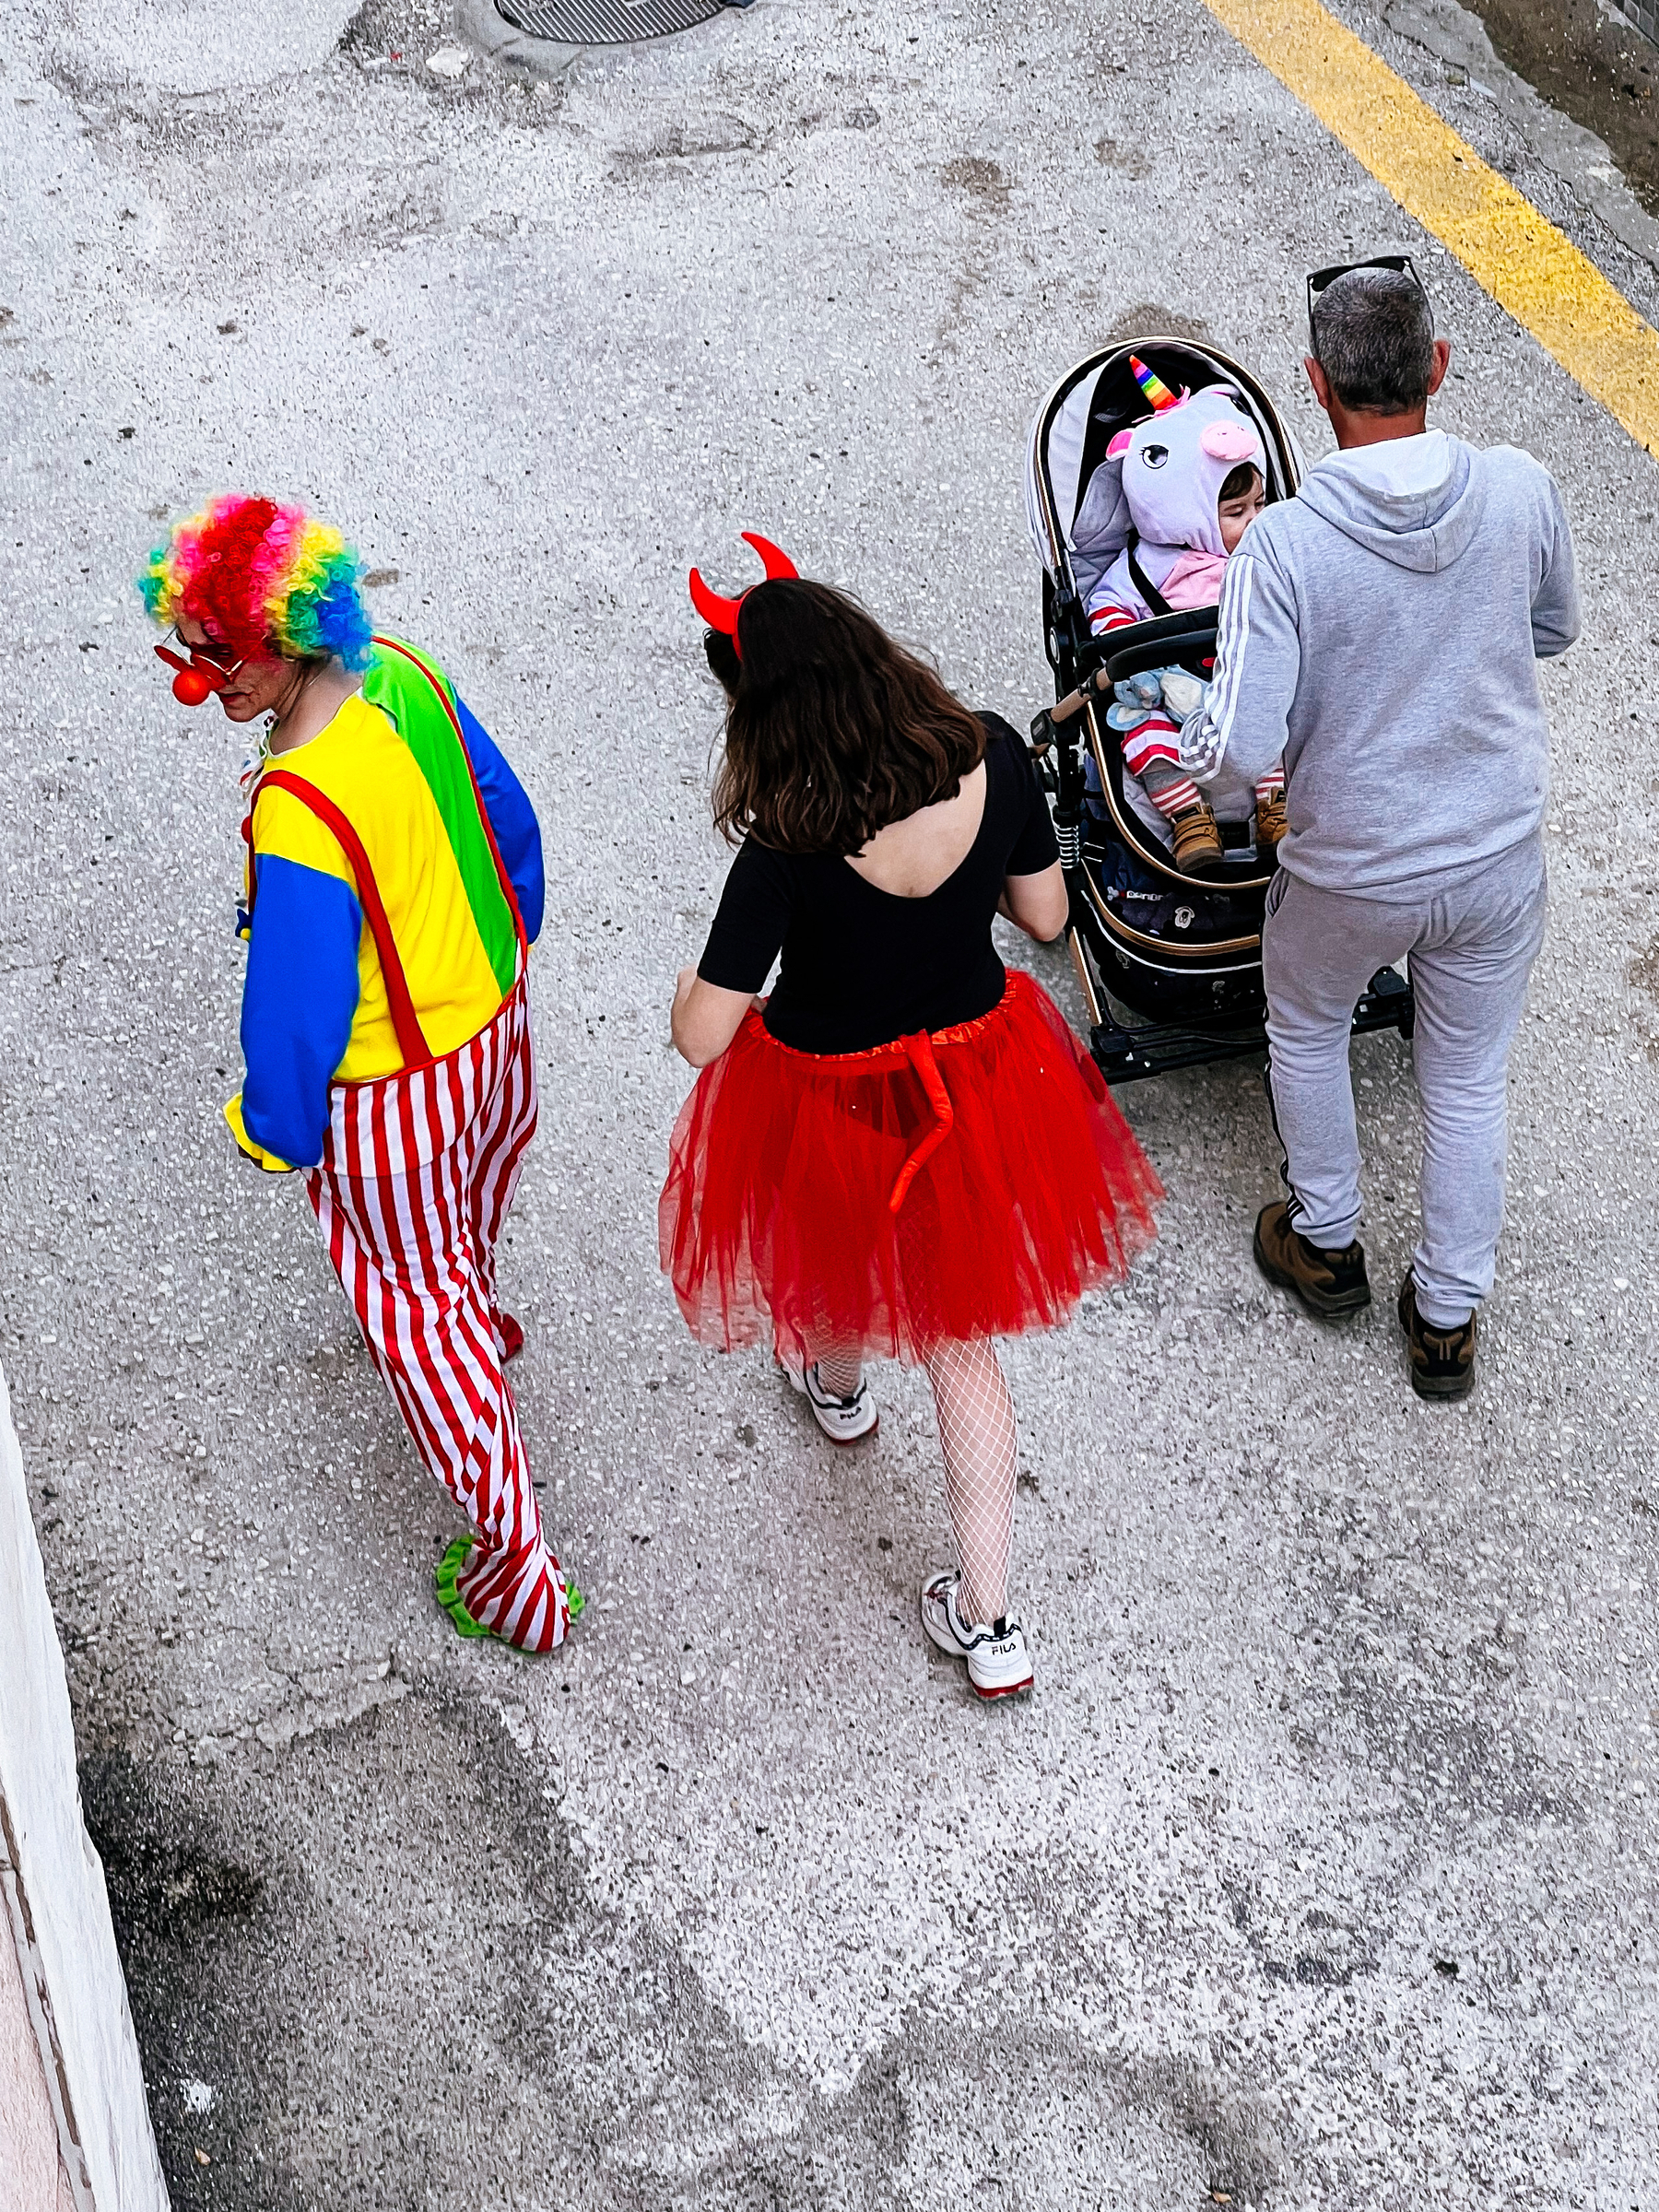 Three people walk away from the camera. We’re looking down on them. There’s a clown on the left, a woman with a red skirt and red devil ears in the middle, and a man with a grey track suit  pushing a stroller with a baby wearing a unicorn suit. Everything feels rather depressing. 